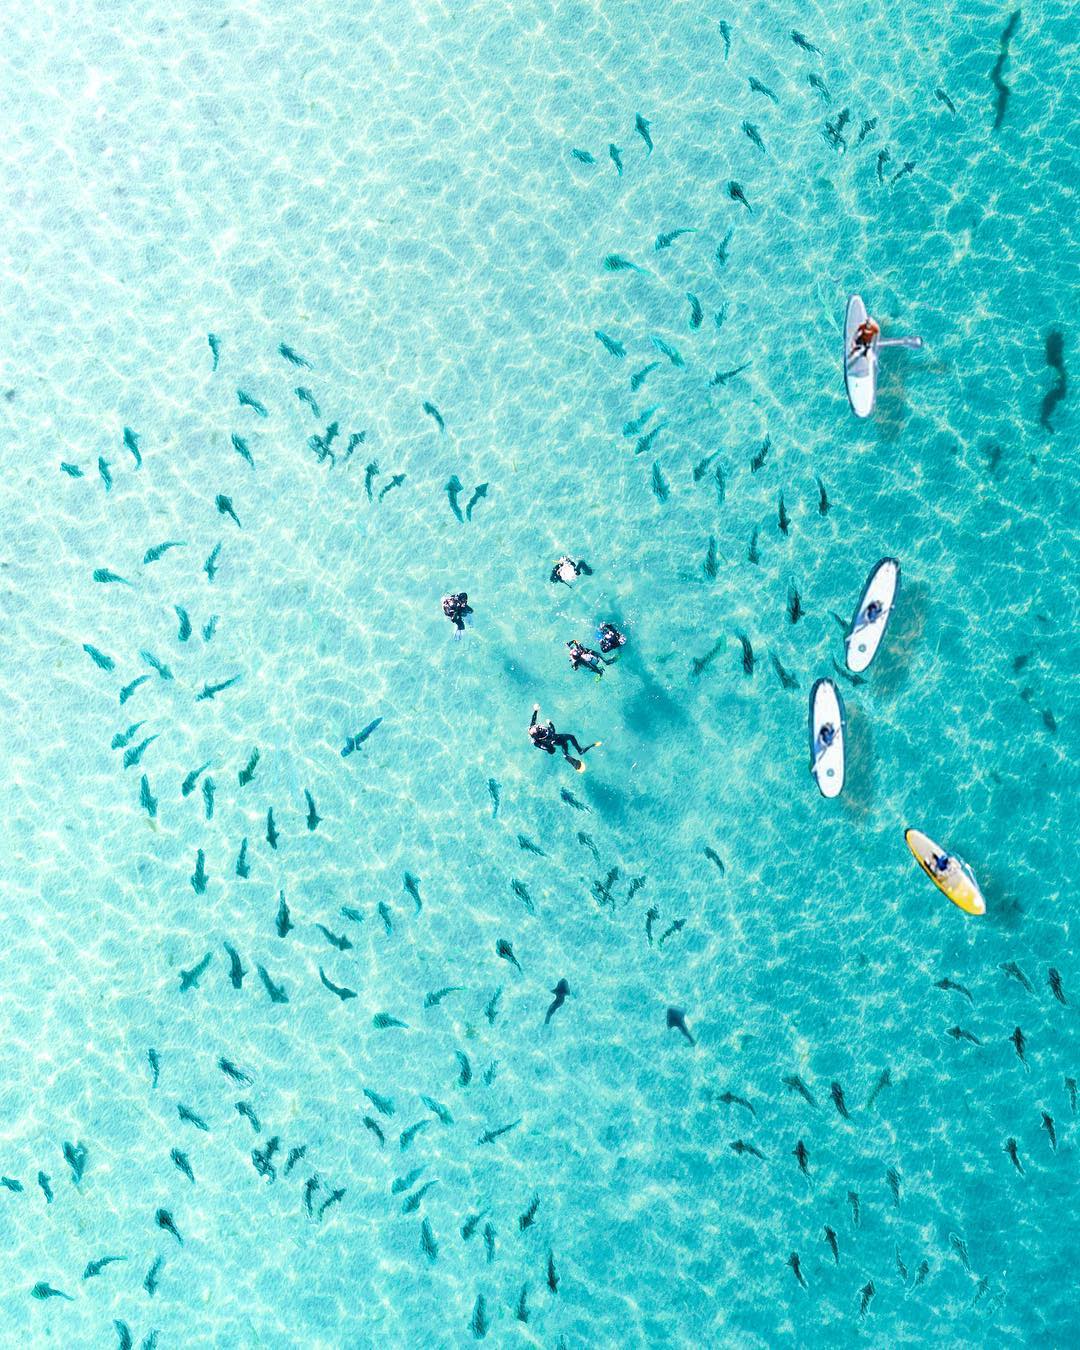 Aerial View of People Scuba Diving Among Leopard Sharks. Photo by Instagram user @monifhabib